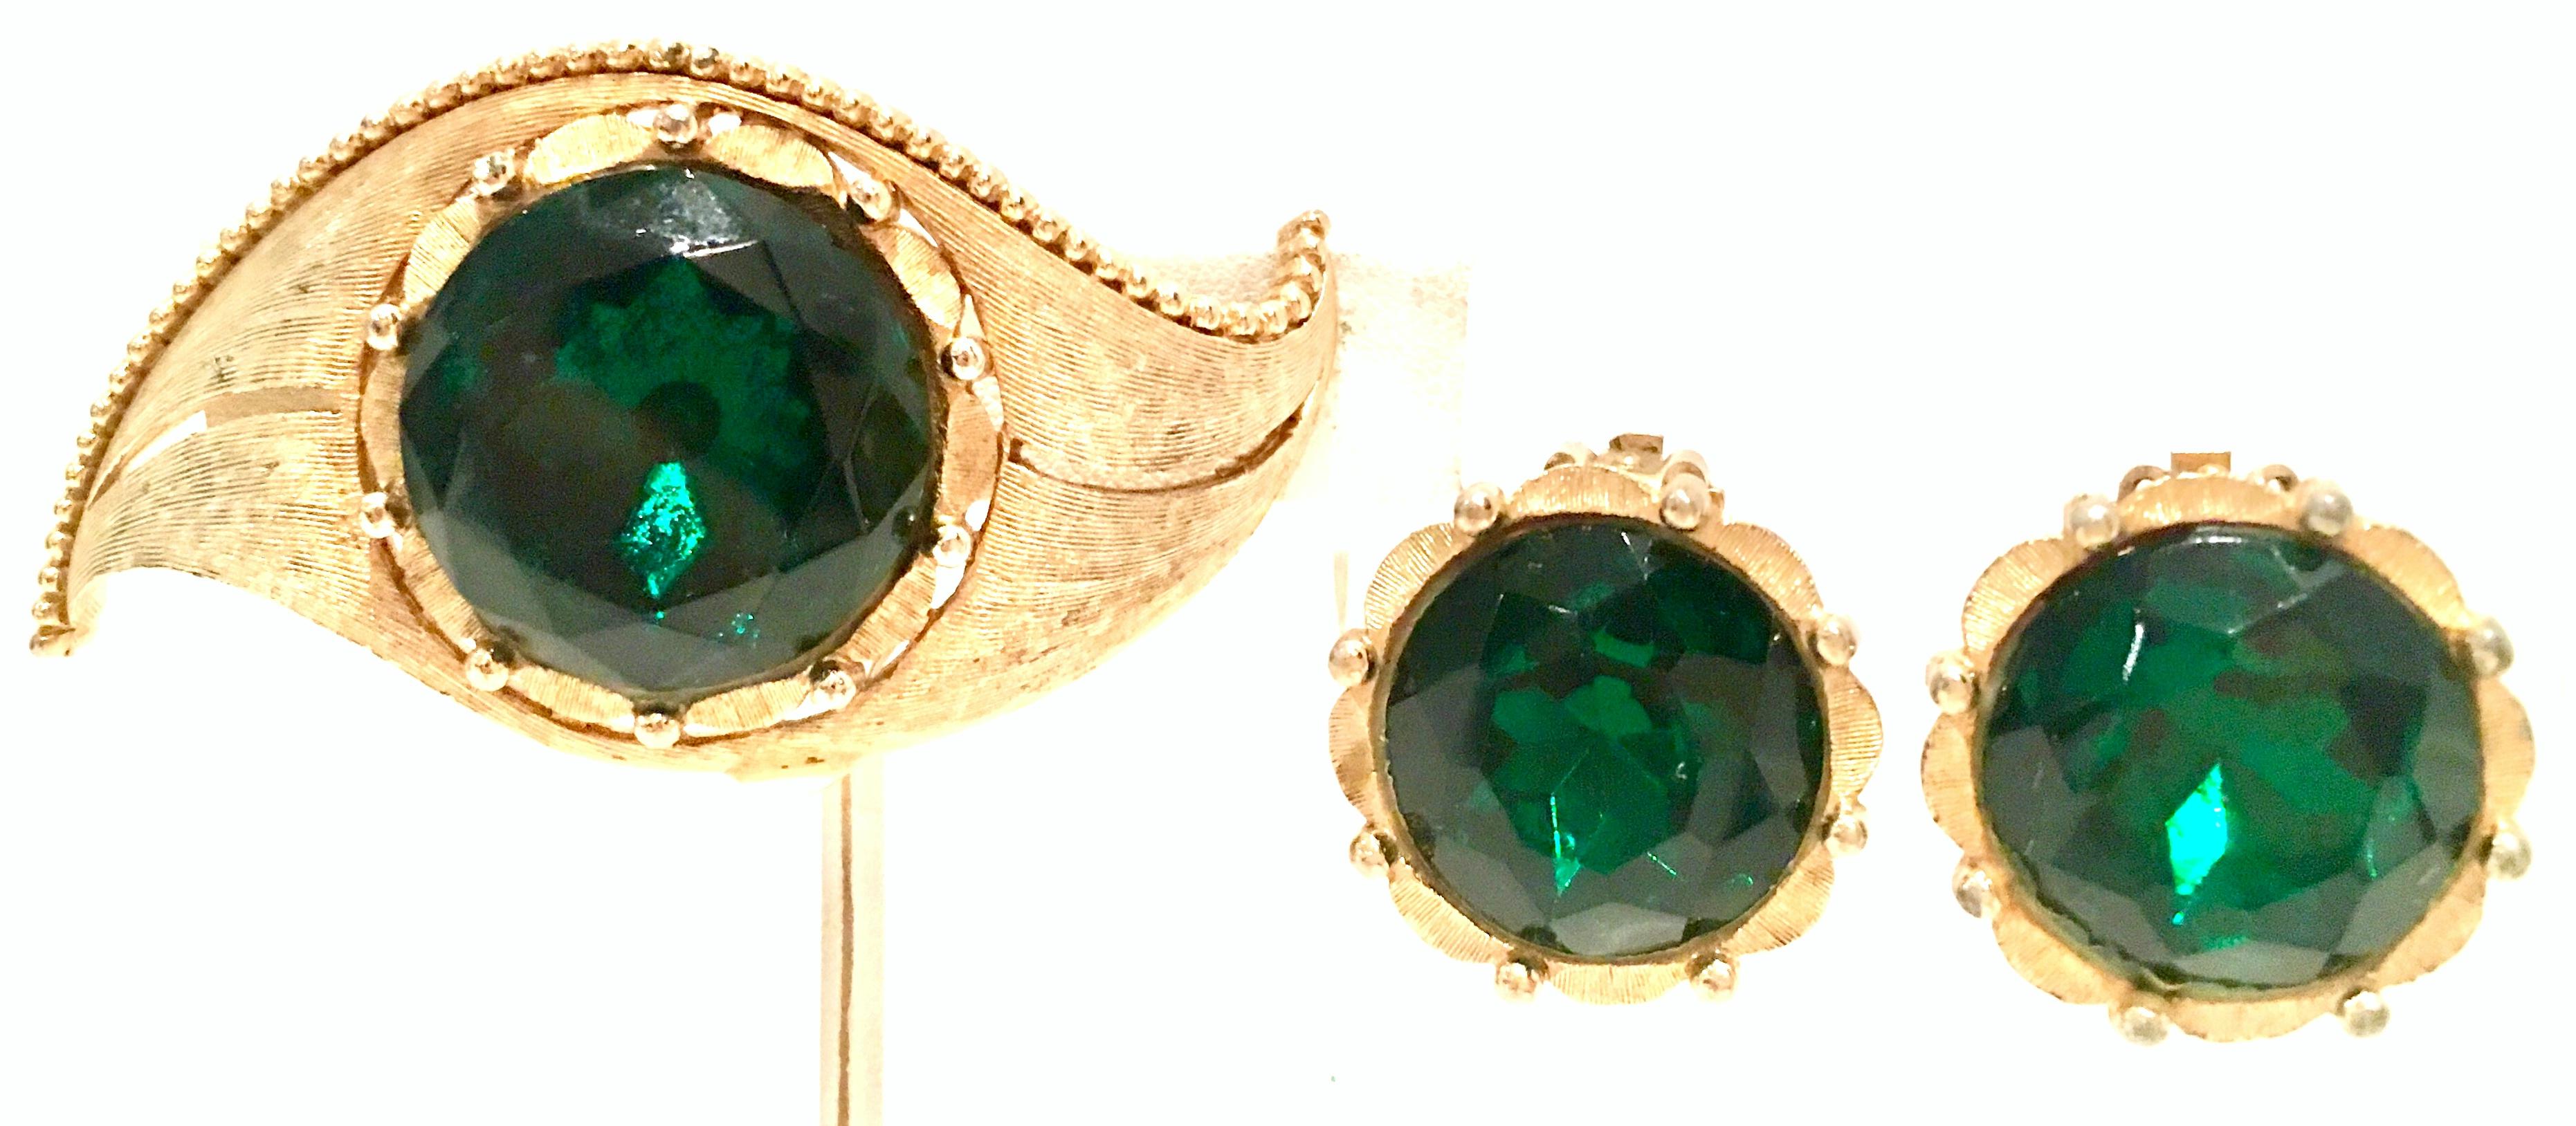 1950'S Gold Plate & Emerald Faceted Art Glass Demi Parure Set Of Three Pieces By, Charel. This finely crafted set features a large 